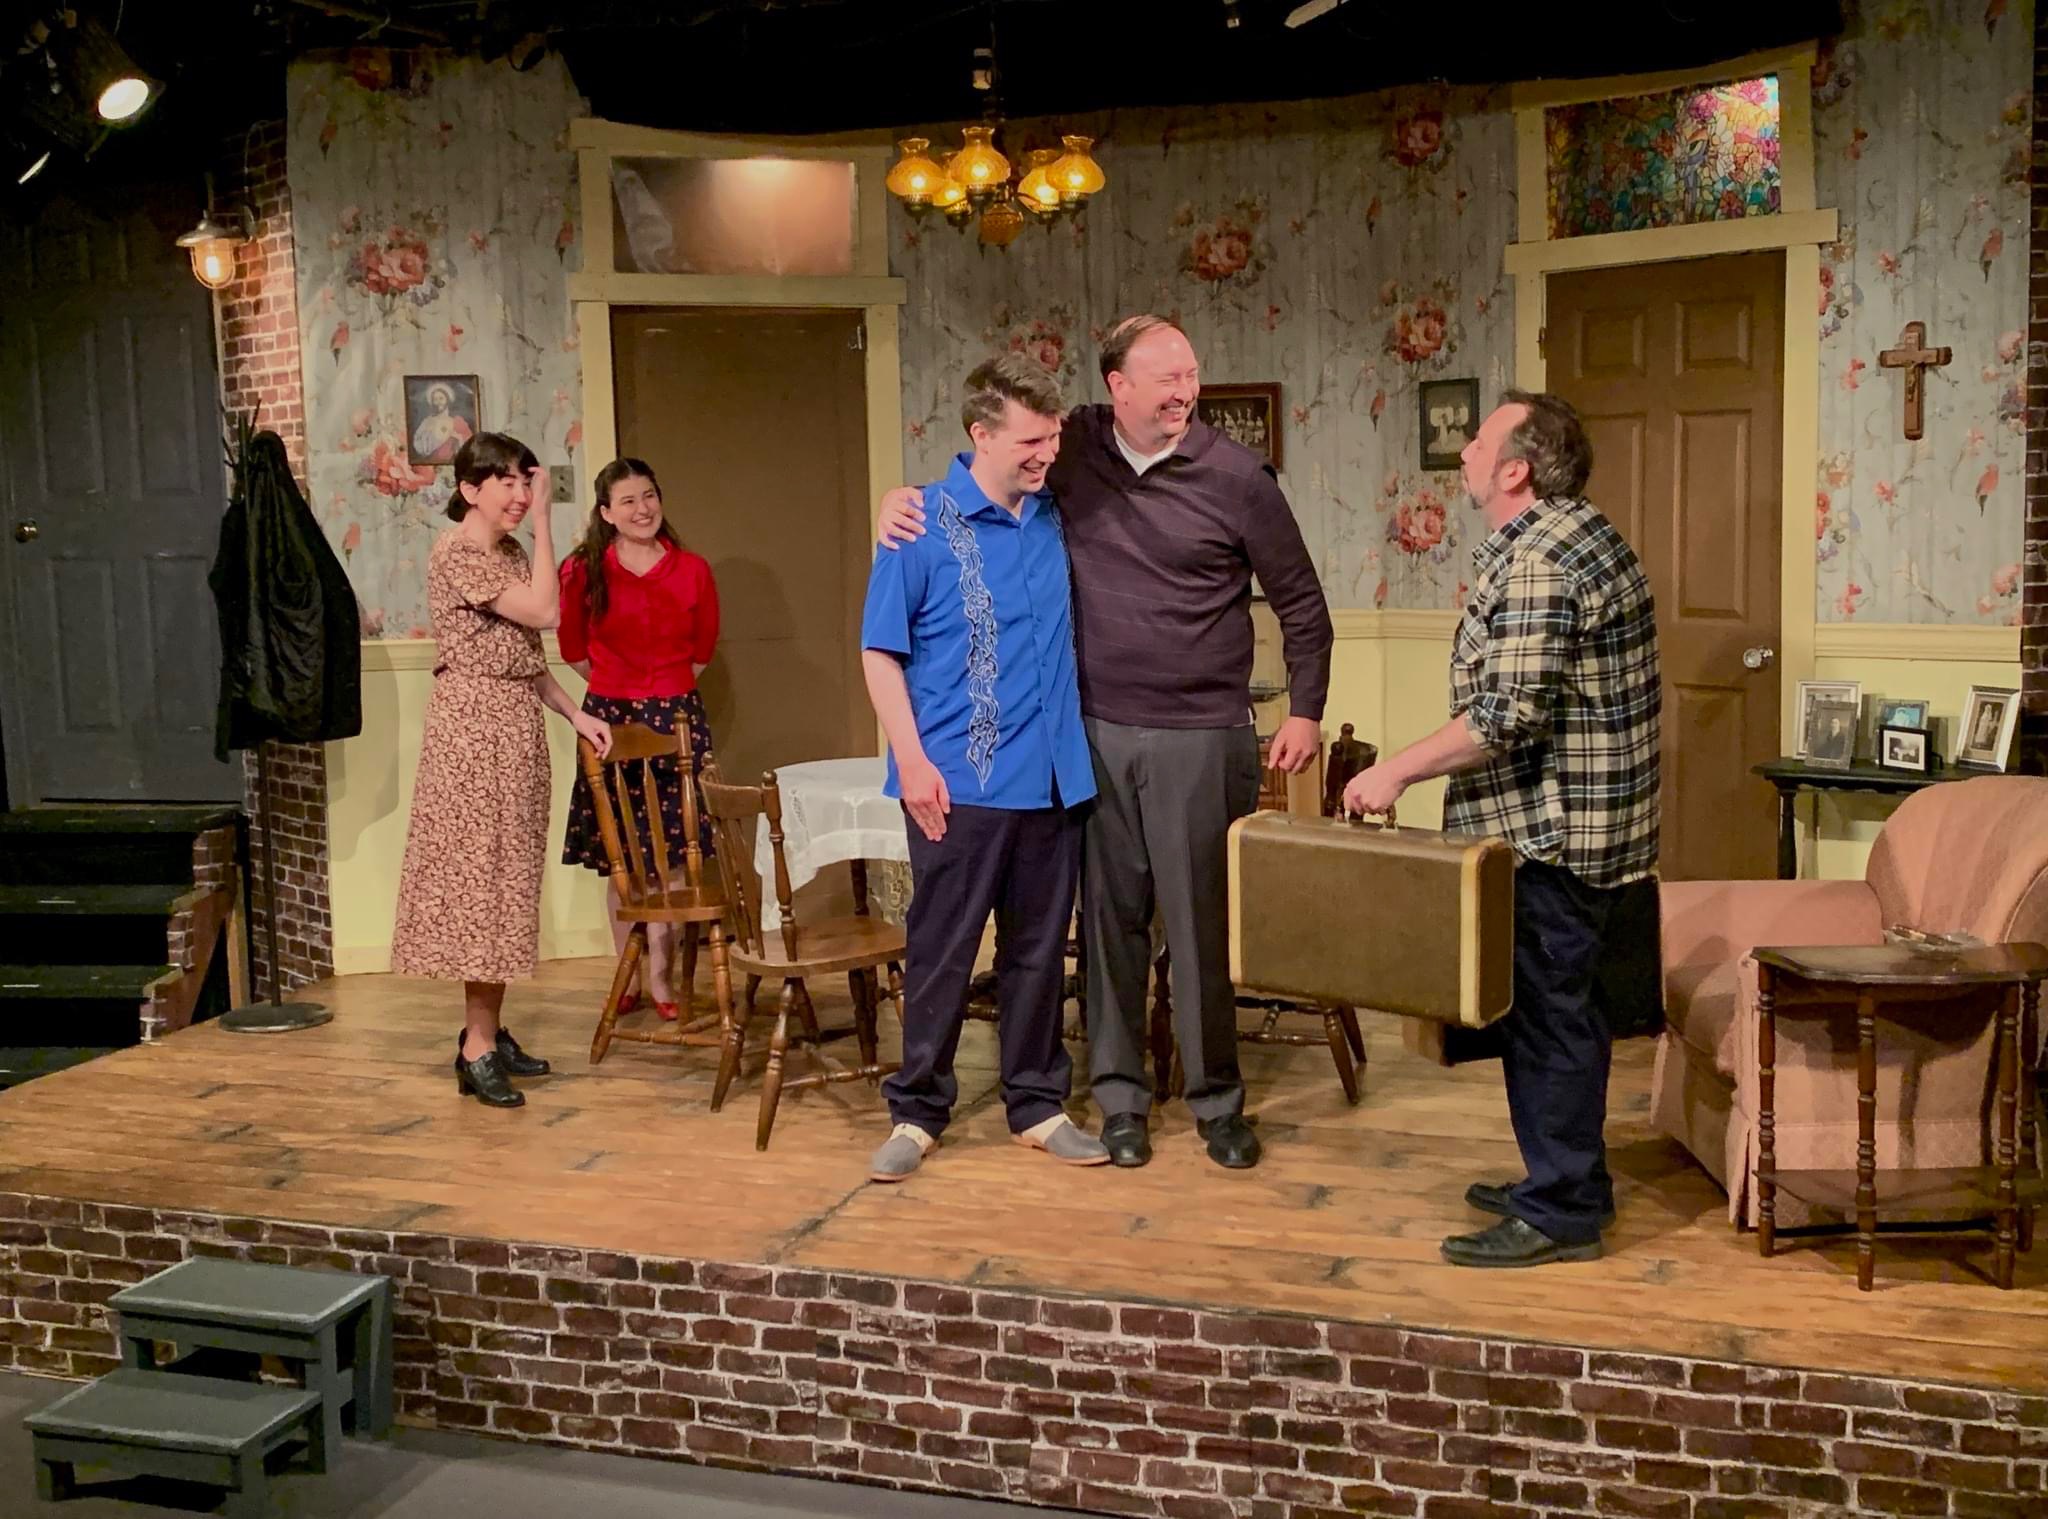 The Carbone family meets Bea’s Sicilian cousins. The end of Eddie Carbone’s life as he knows it. .
Left to right: Jennifer DeMarco (Bea), Mara Felice (Catharine), Sean Collins (Rodolpho), Ryan Kirchner (Marco) & Eric Rupp (Eddie)